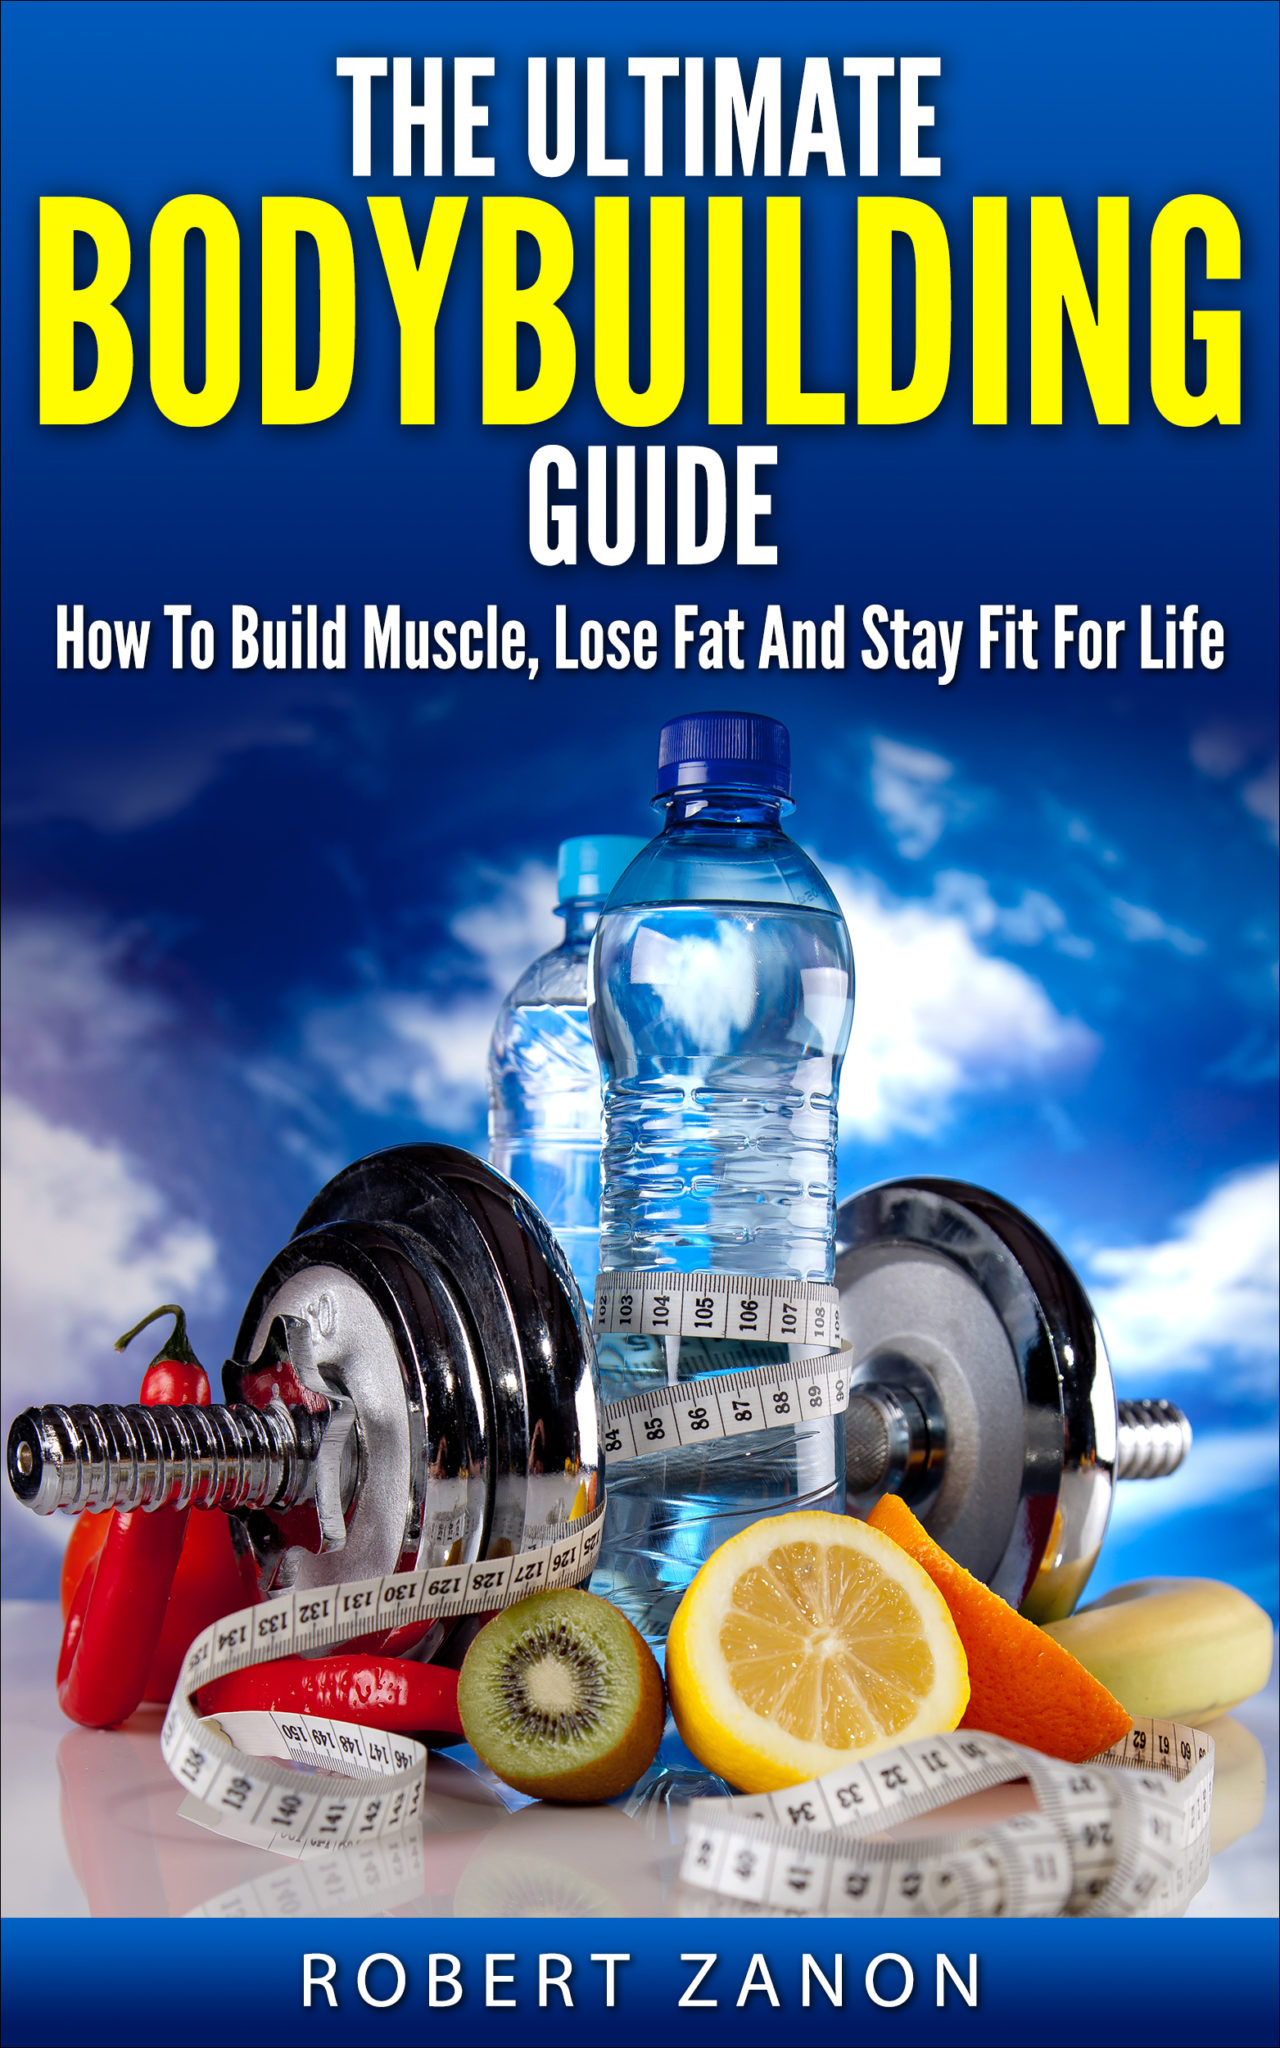 The Ultimate Bodybuilding Guide: How To Build Muscle, Lose Fat and Stay Fit For Life by Roberto Zanon